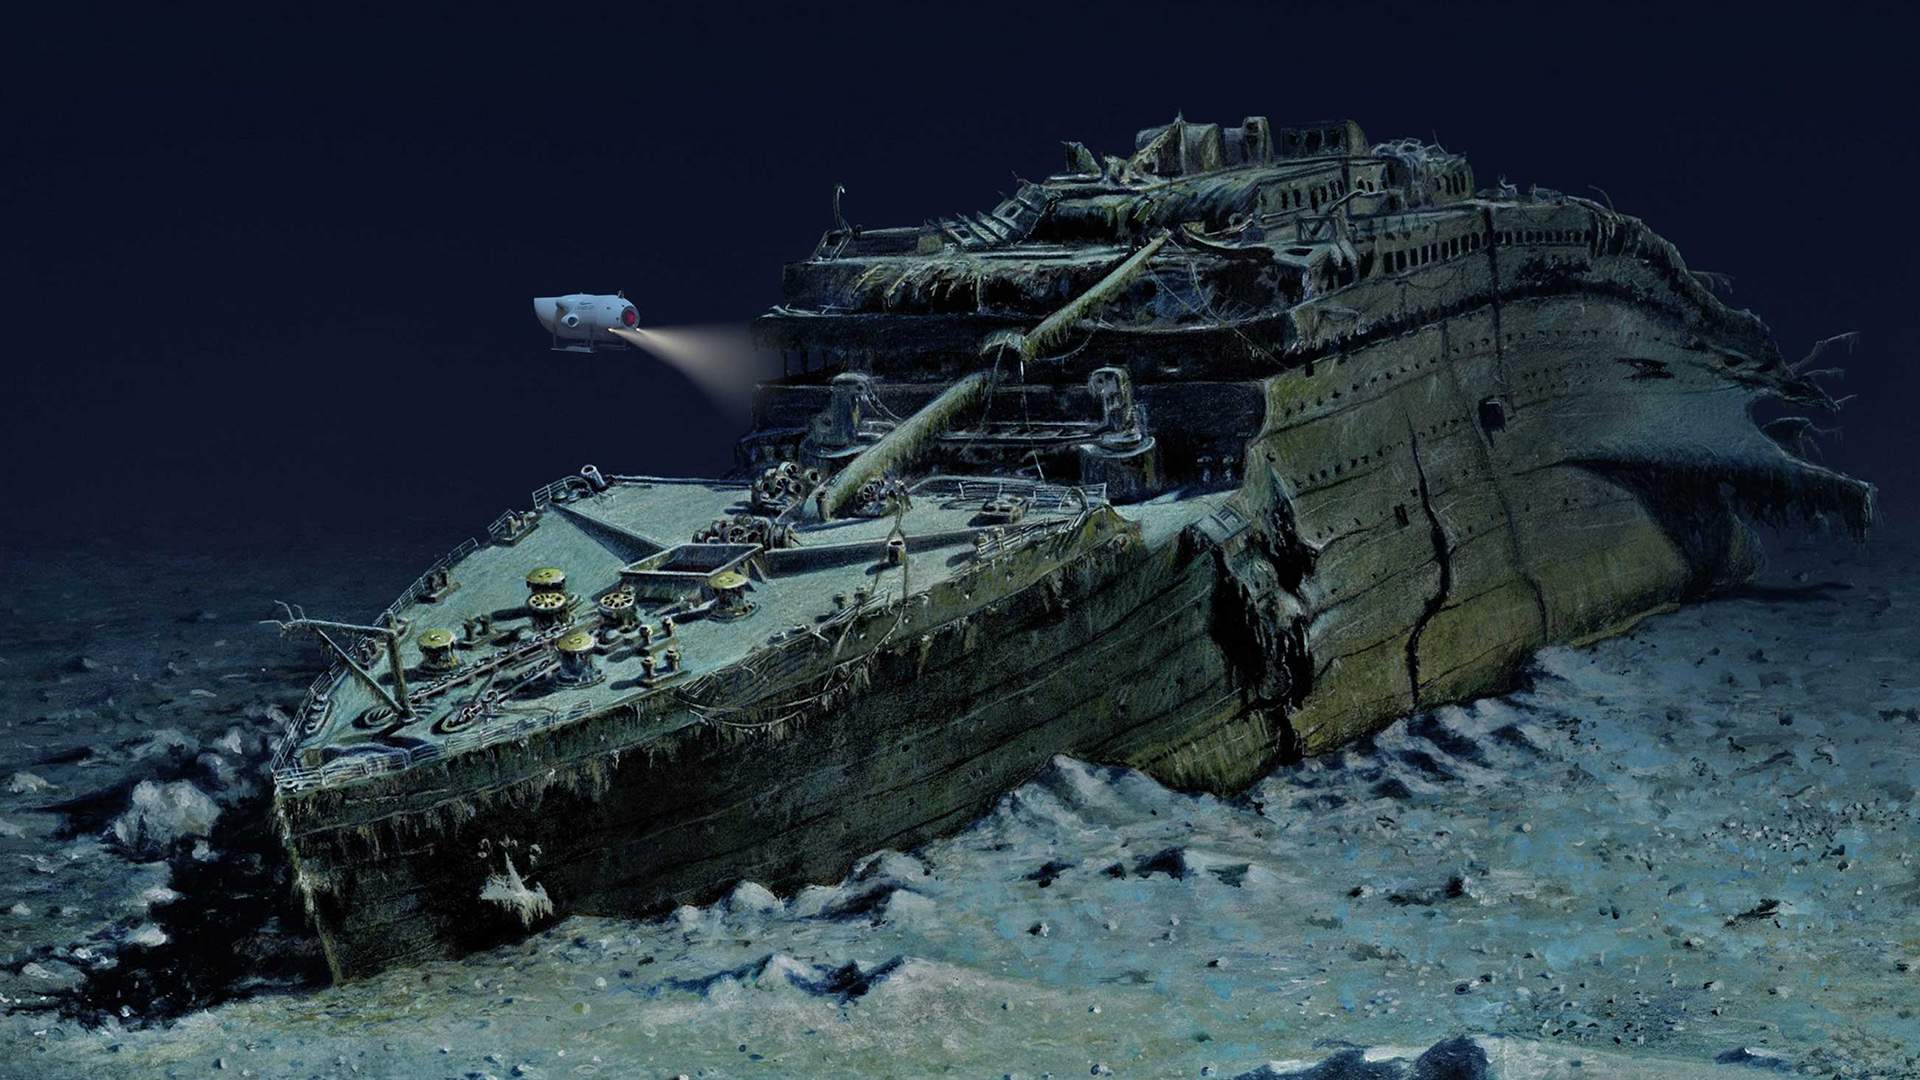 You Can Now Take Underwater Tours of the Titanic